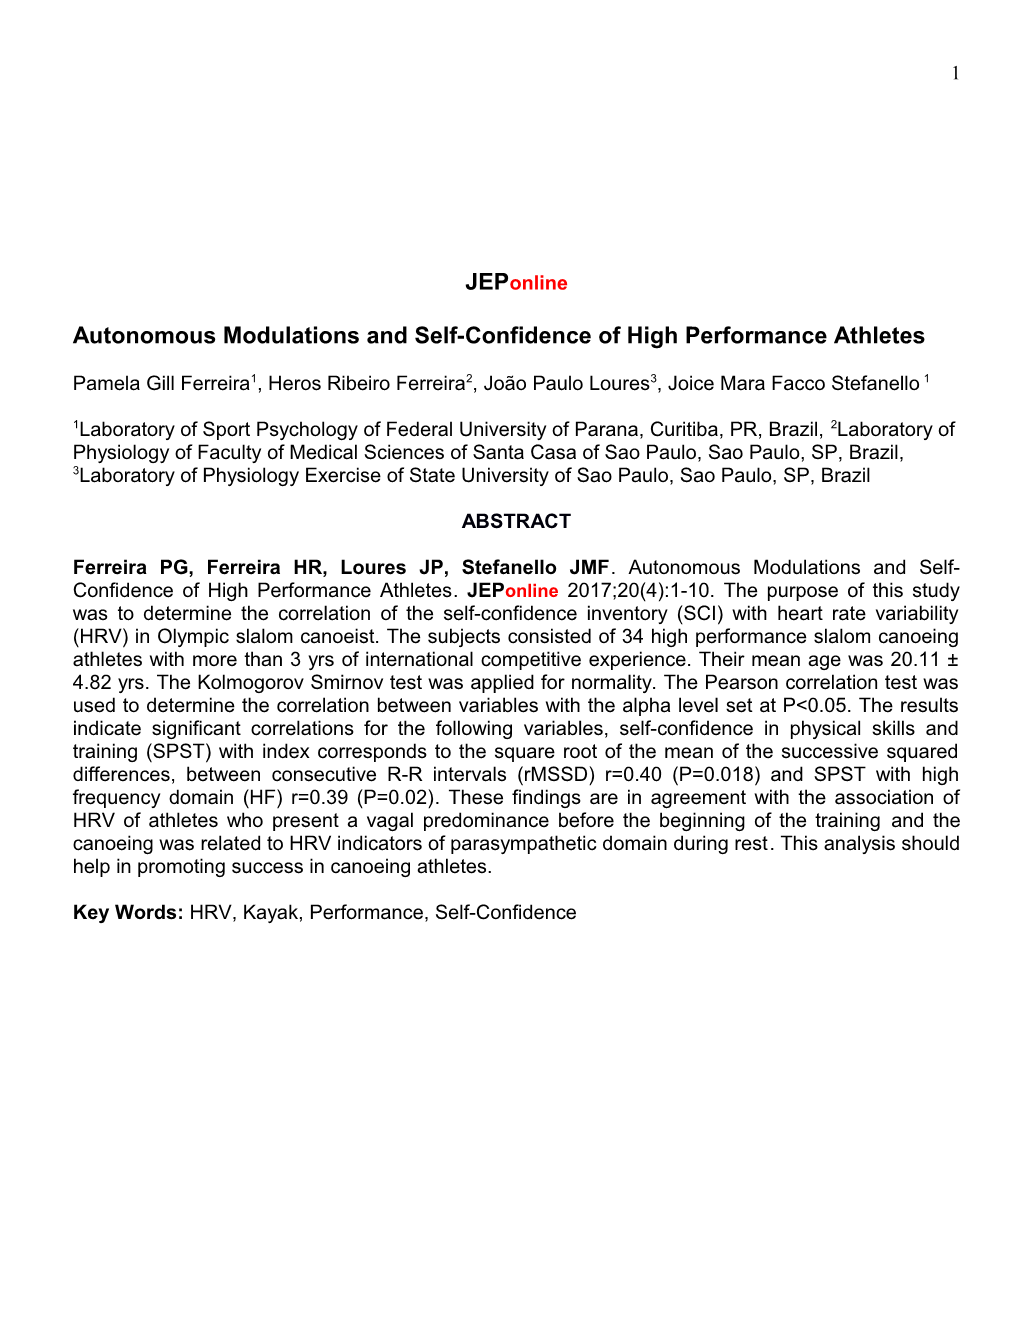 Autonomous Modulations and Self-Confidence of High Performance Athletes